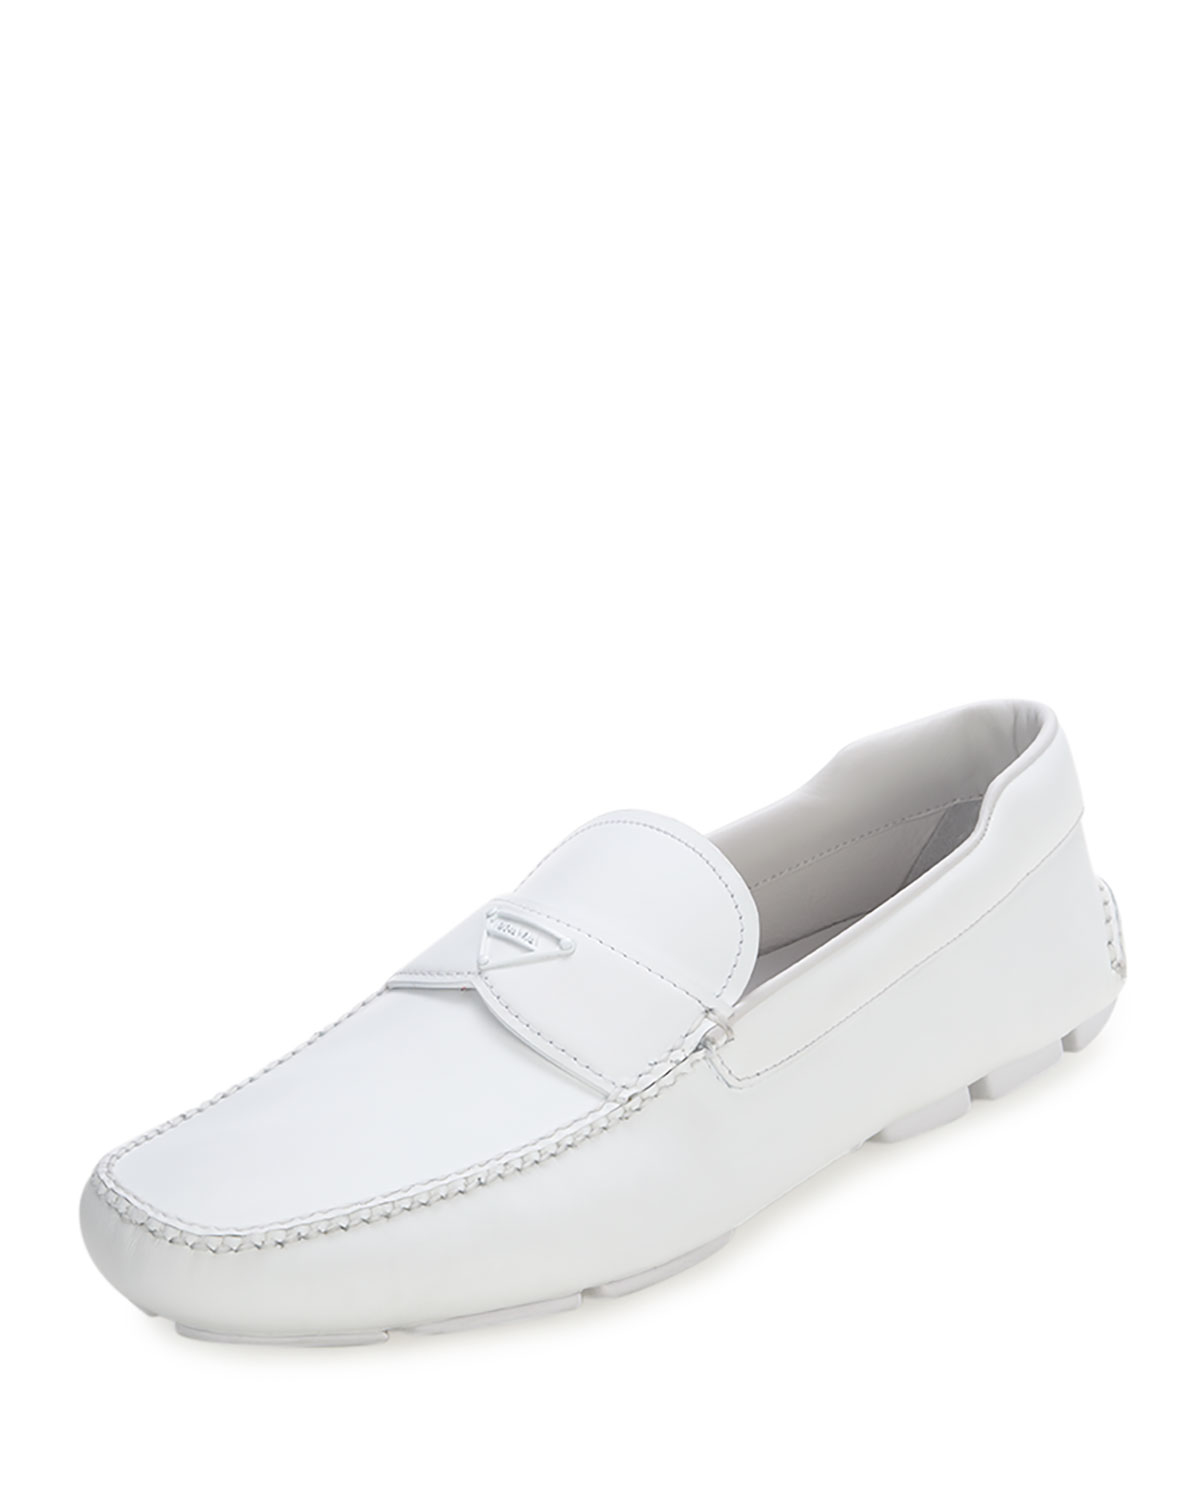 Lyst - Prada Rubber-Sole Leather Loafers in White